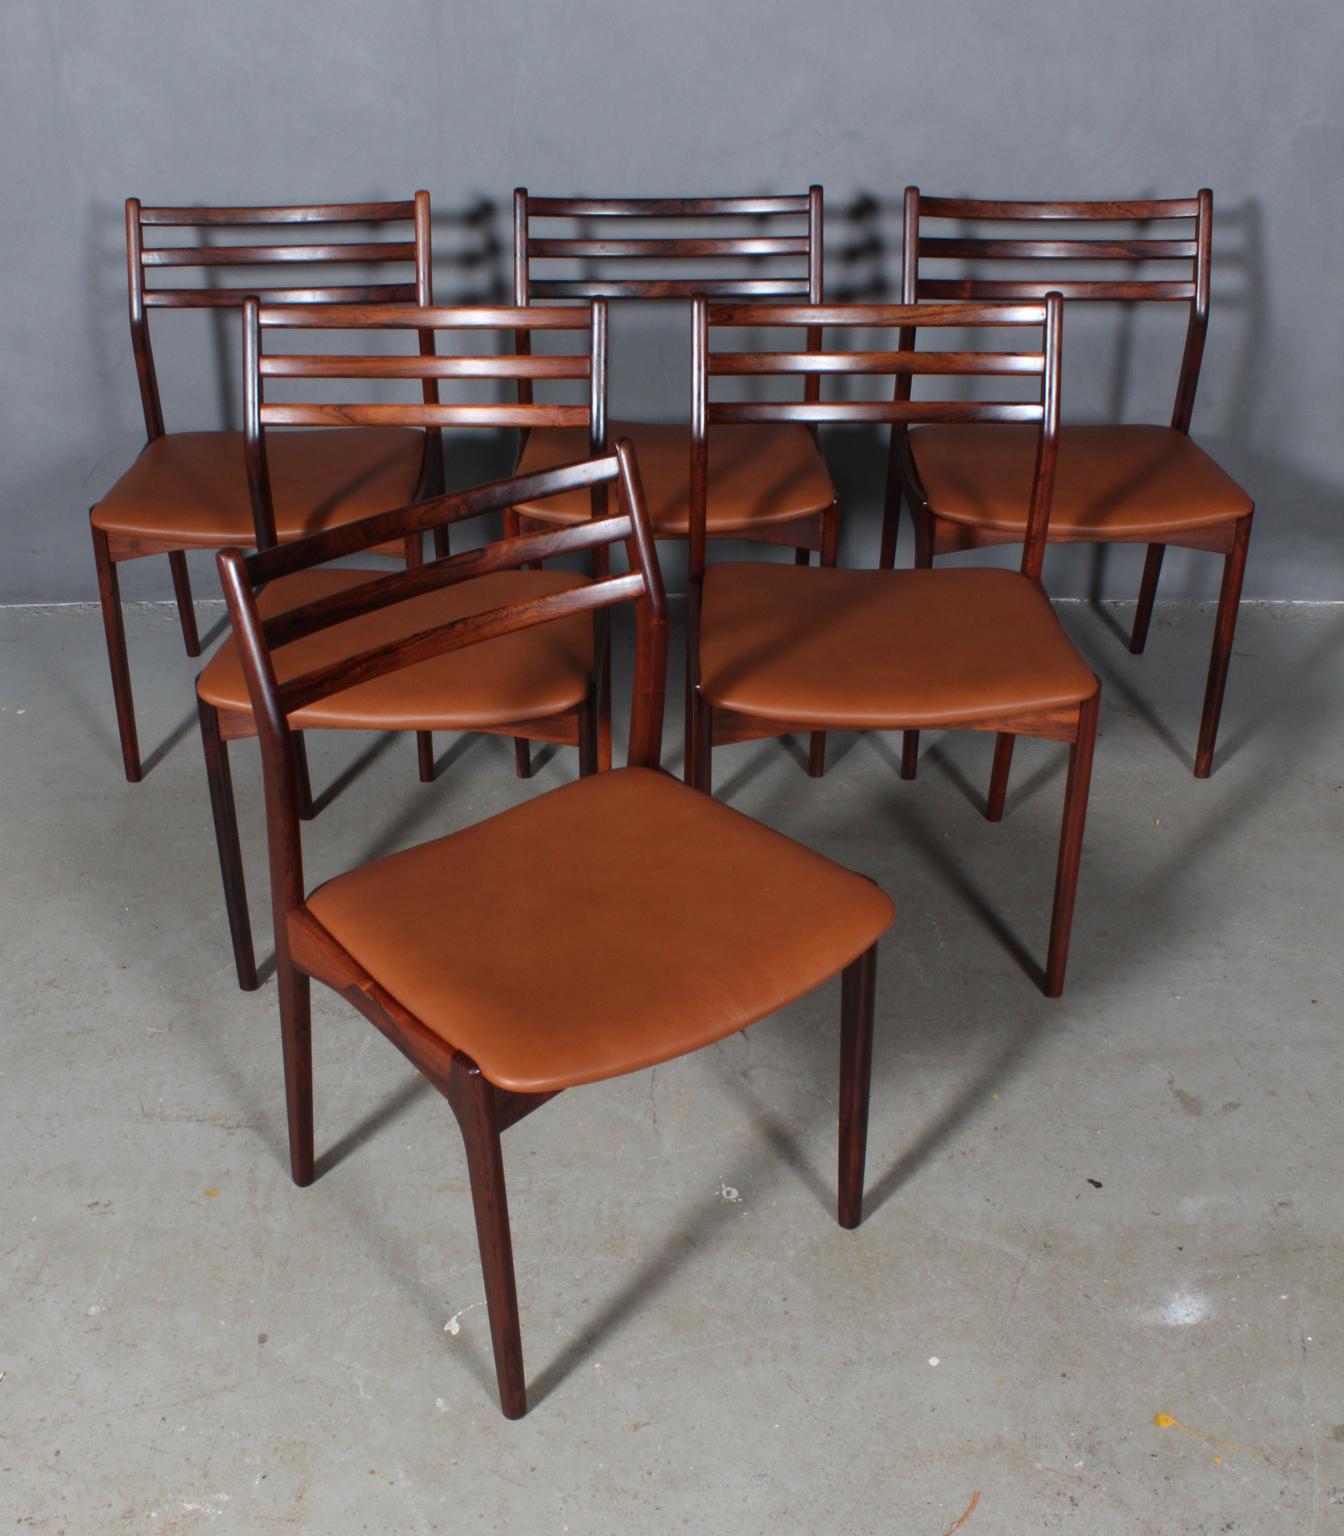 Vestervig Eriksen set of six dining chairs in partly solid rosewood. 

Seats new upholstered with tan pure aniline leather.

Made by Brdr. Tromborg’s Eftf., Møbelfabrik Vestervig Eriksen Aarhus.